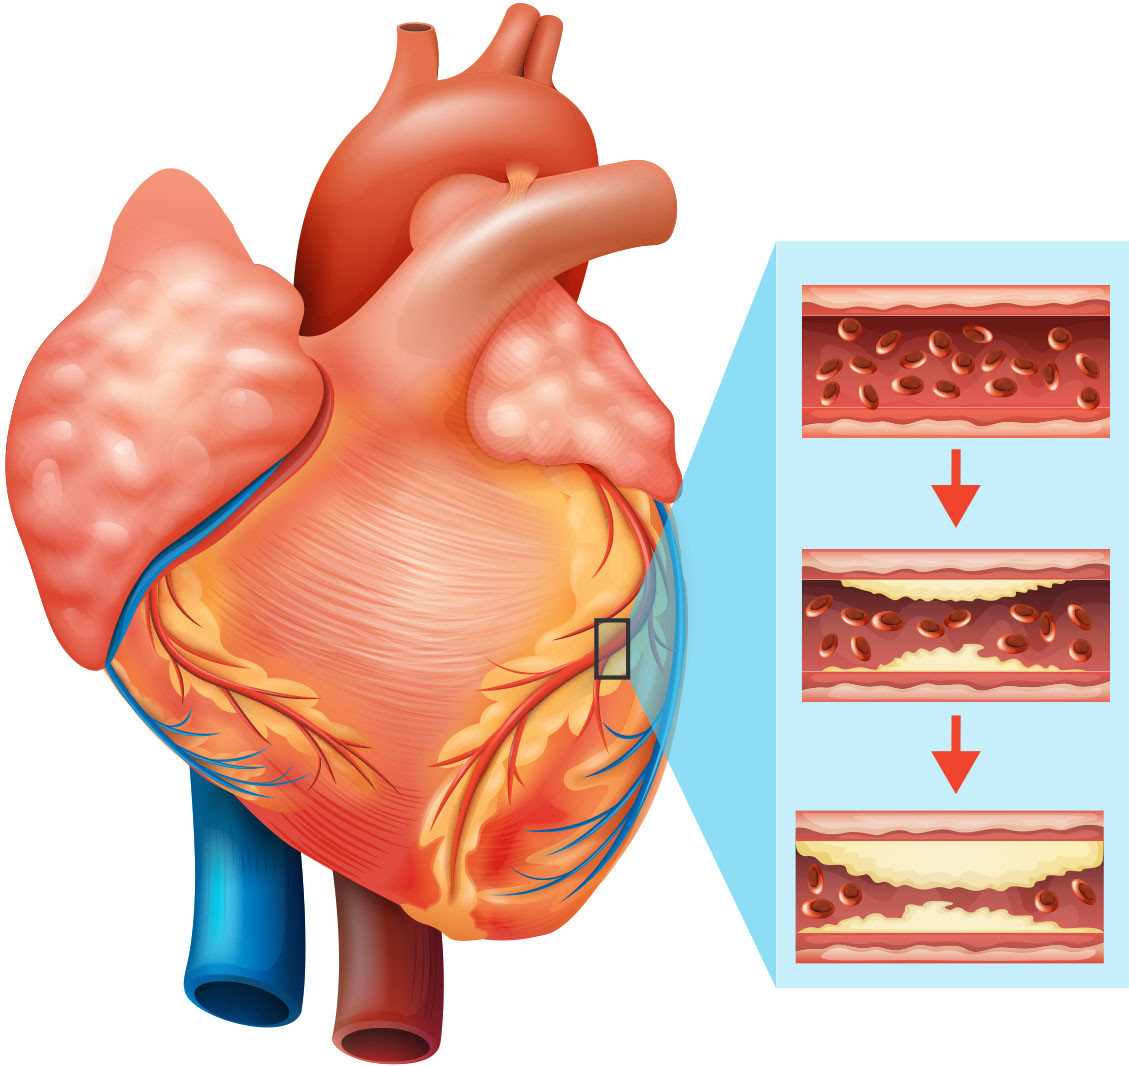 illustration of a heart with a magnified section showing how plaque can build up in arteries